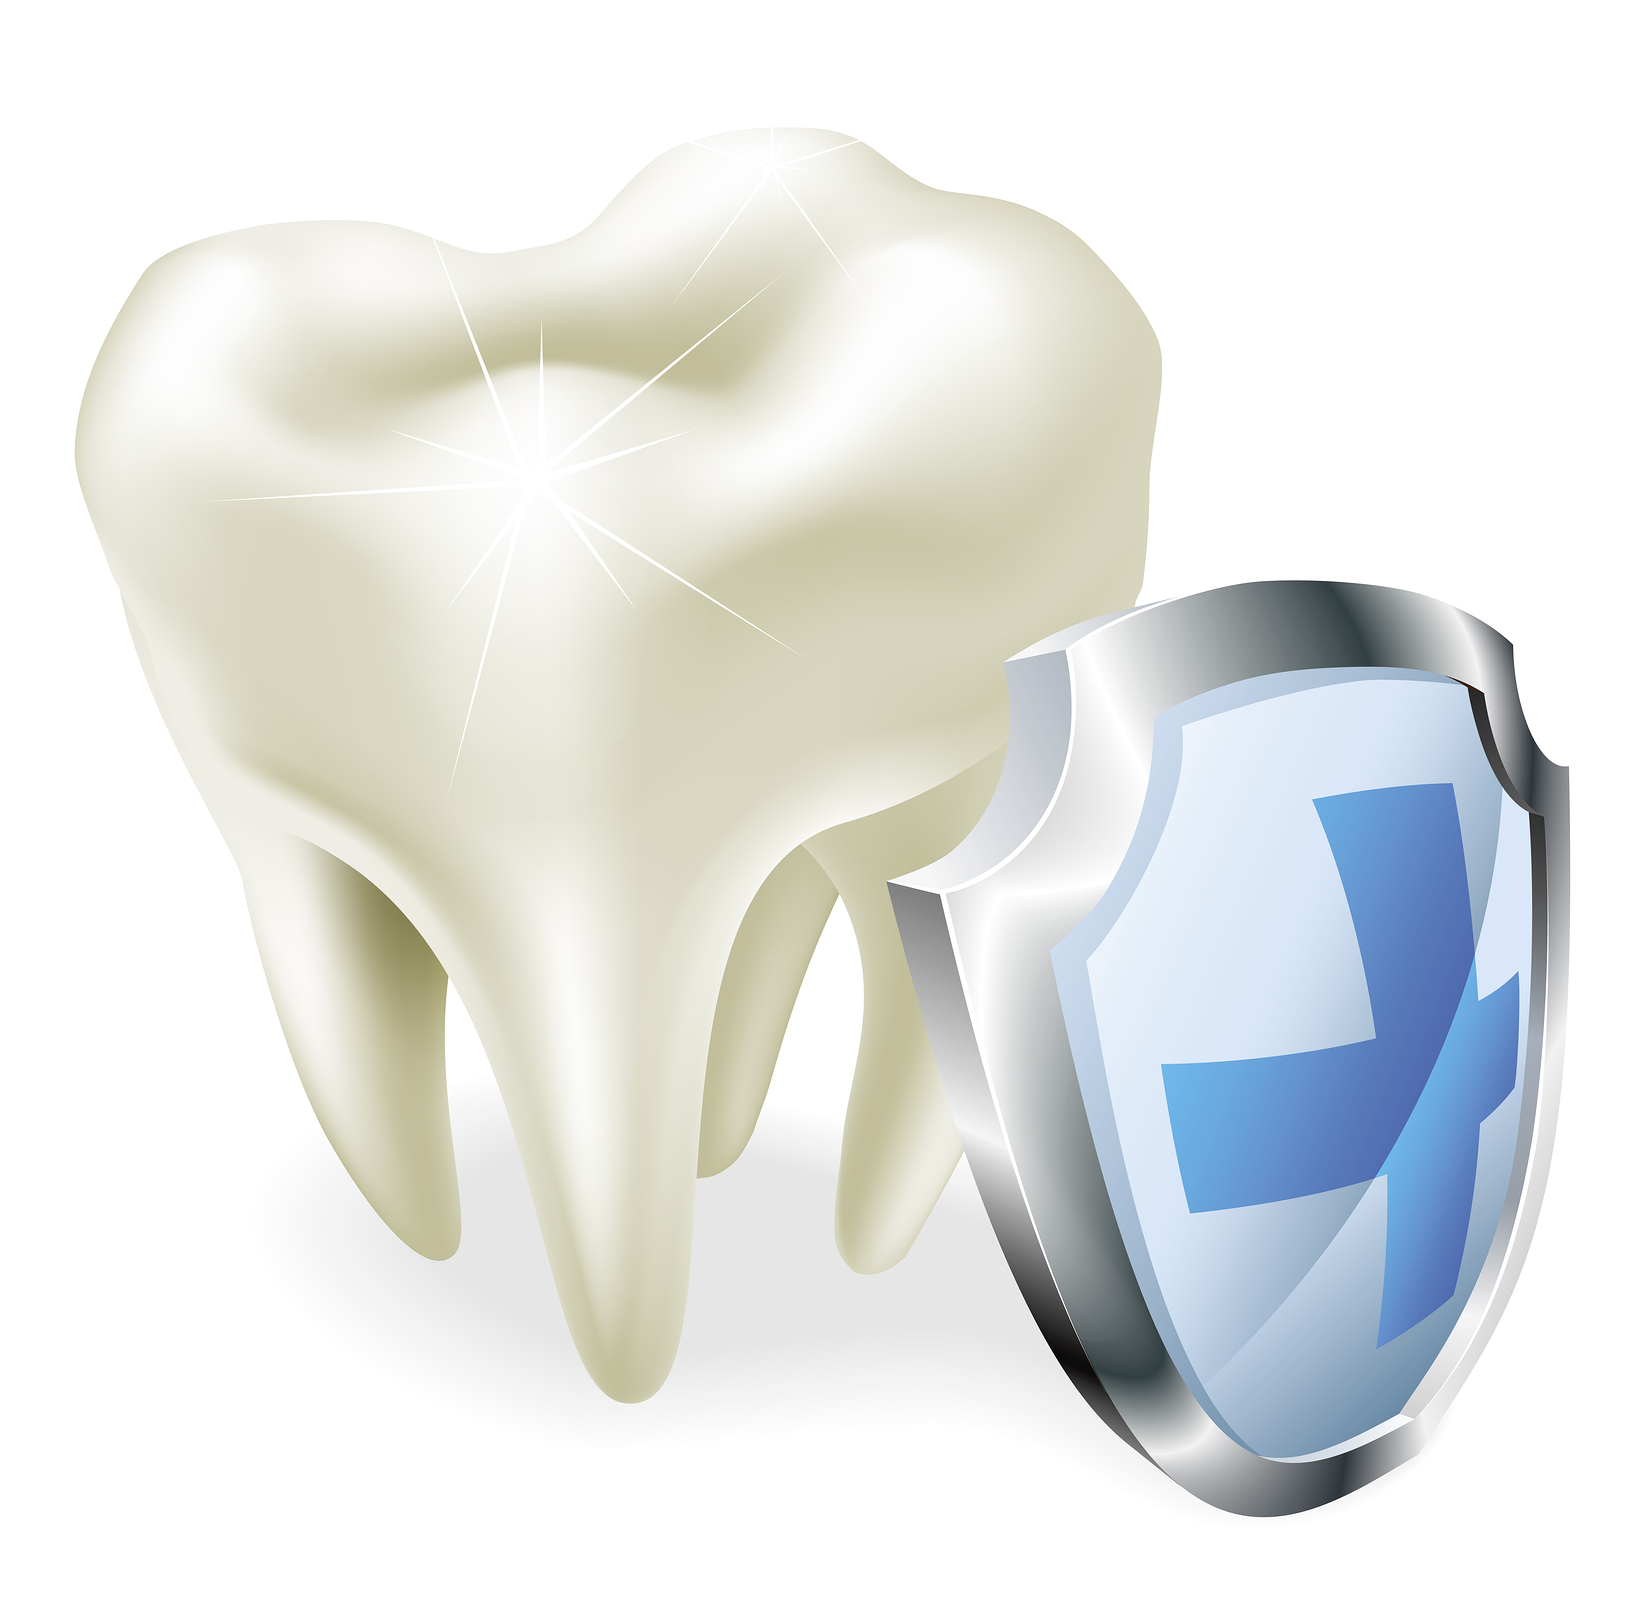 bigstock-Tooth-Protection-Concept-24323720.jpg